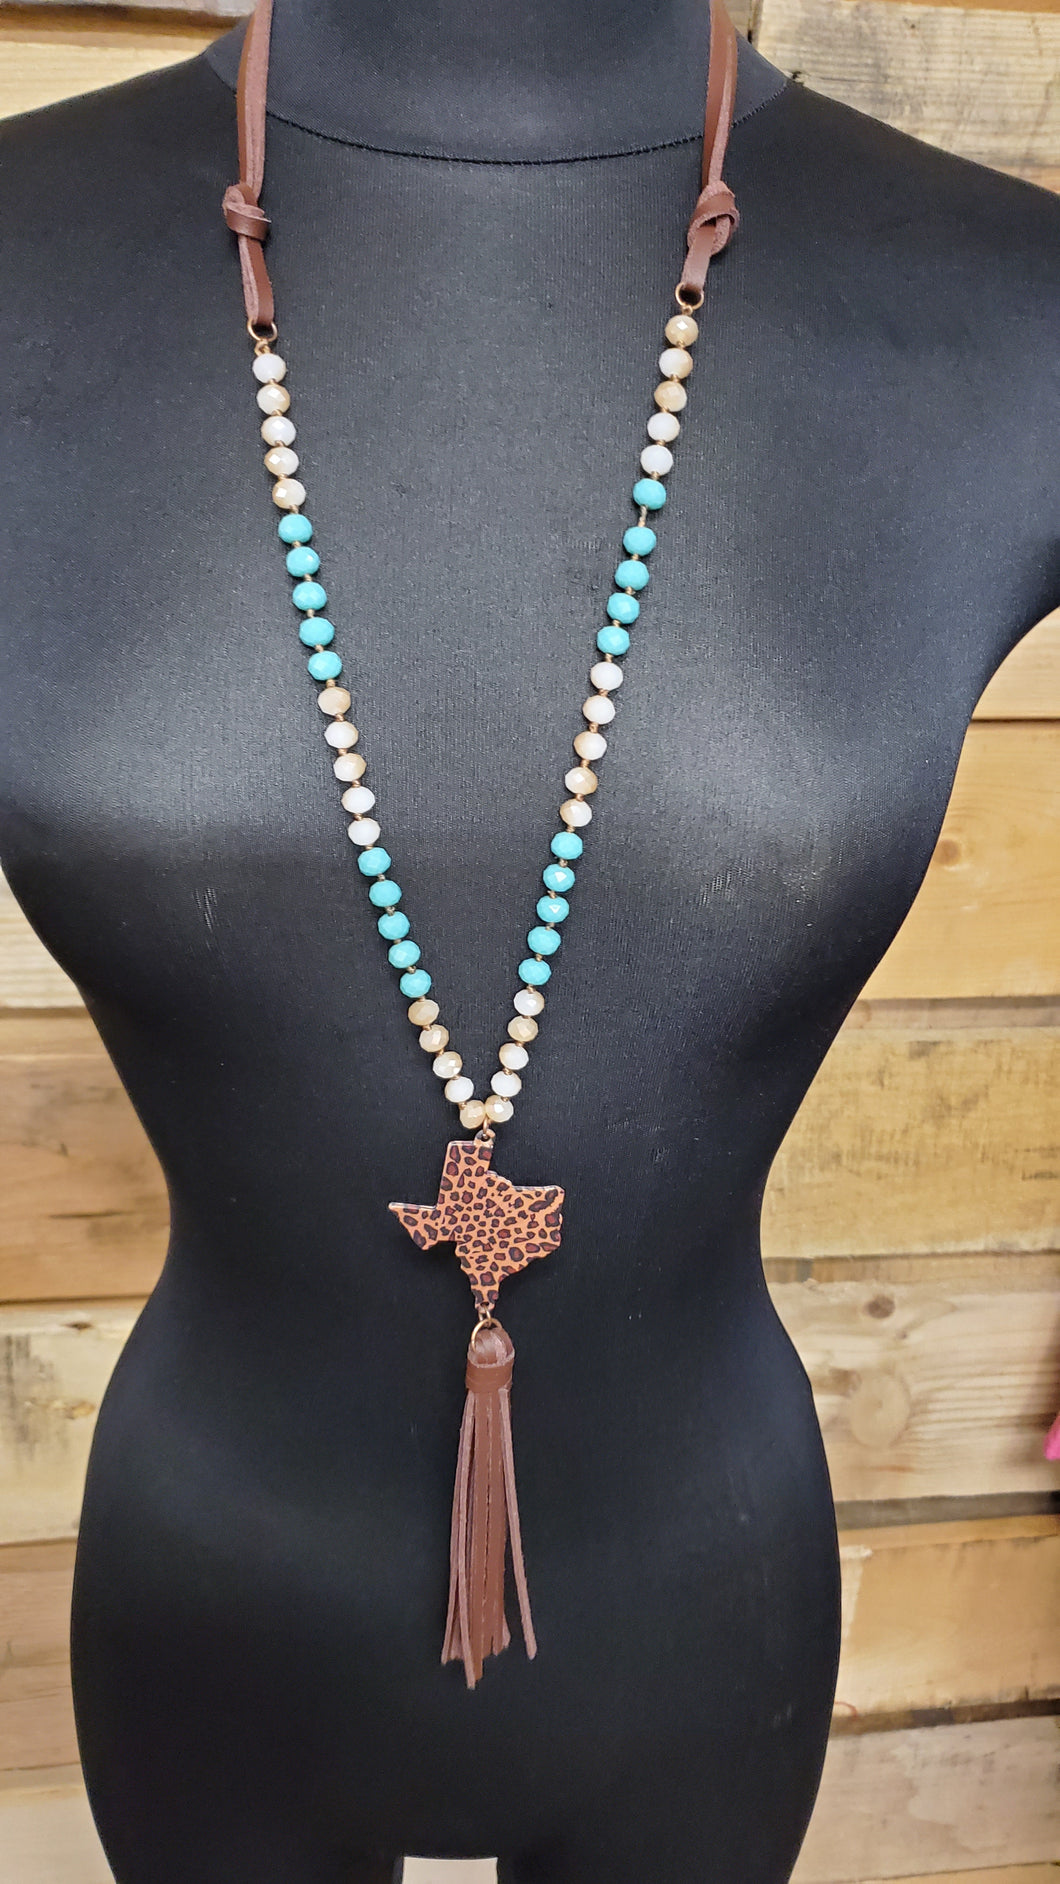 Texas Leopard Necklace With Sparkle Turquoise, Cream Bead & Leather 71803